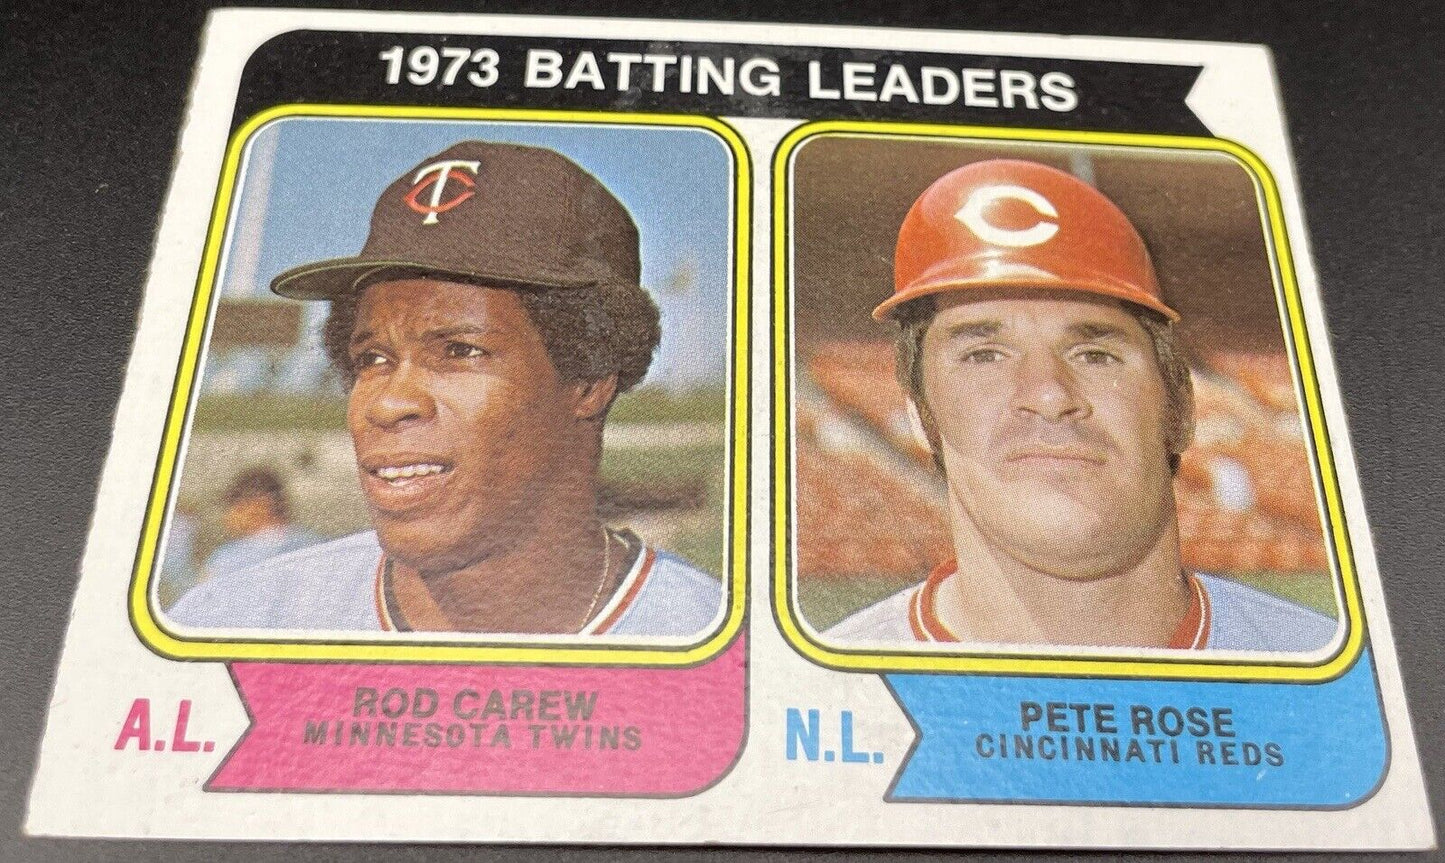 Rod Carew, Pete Rose 1974 Topps #201 1973 Batting Leaders HOF Twins/Reds! Goats